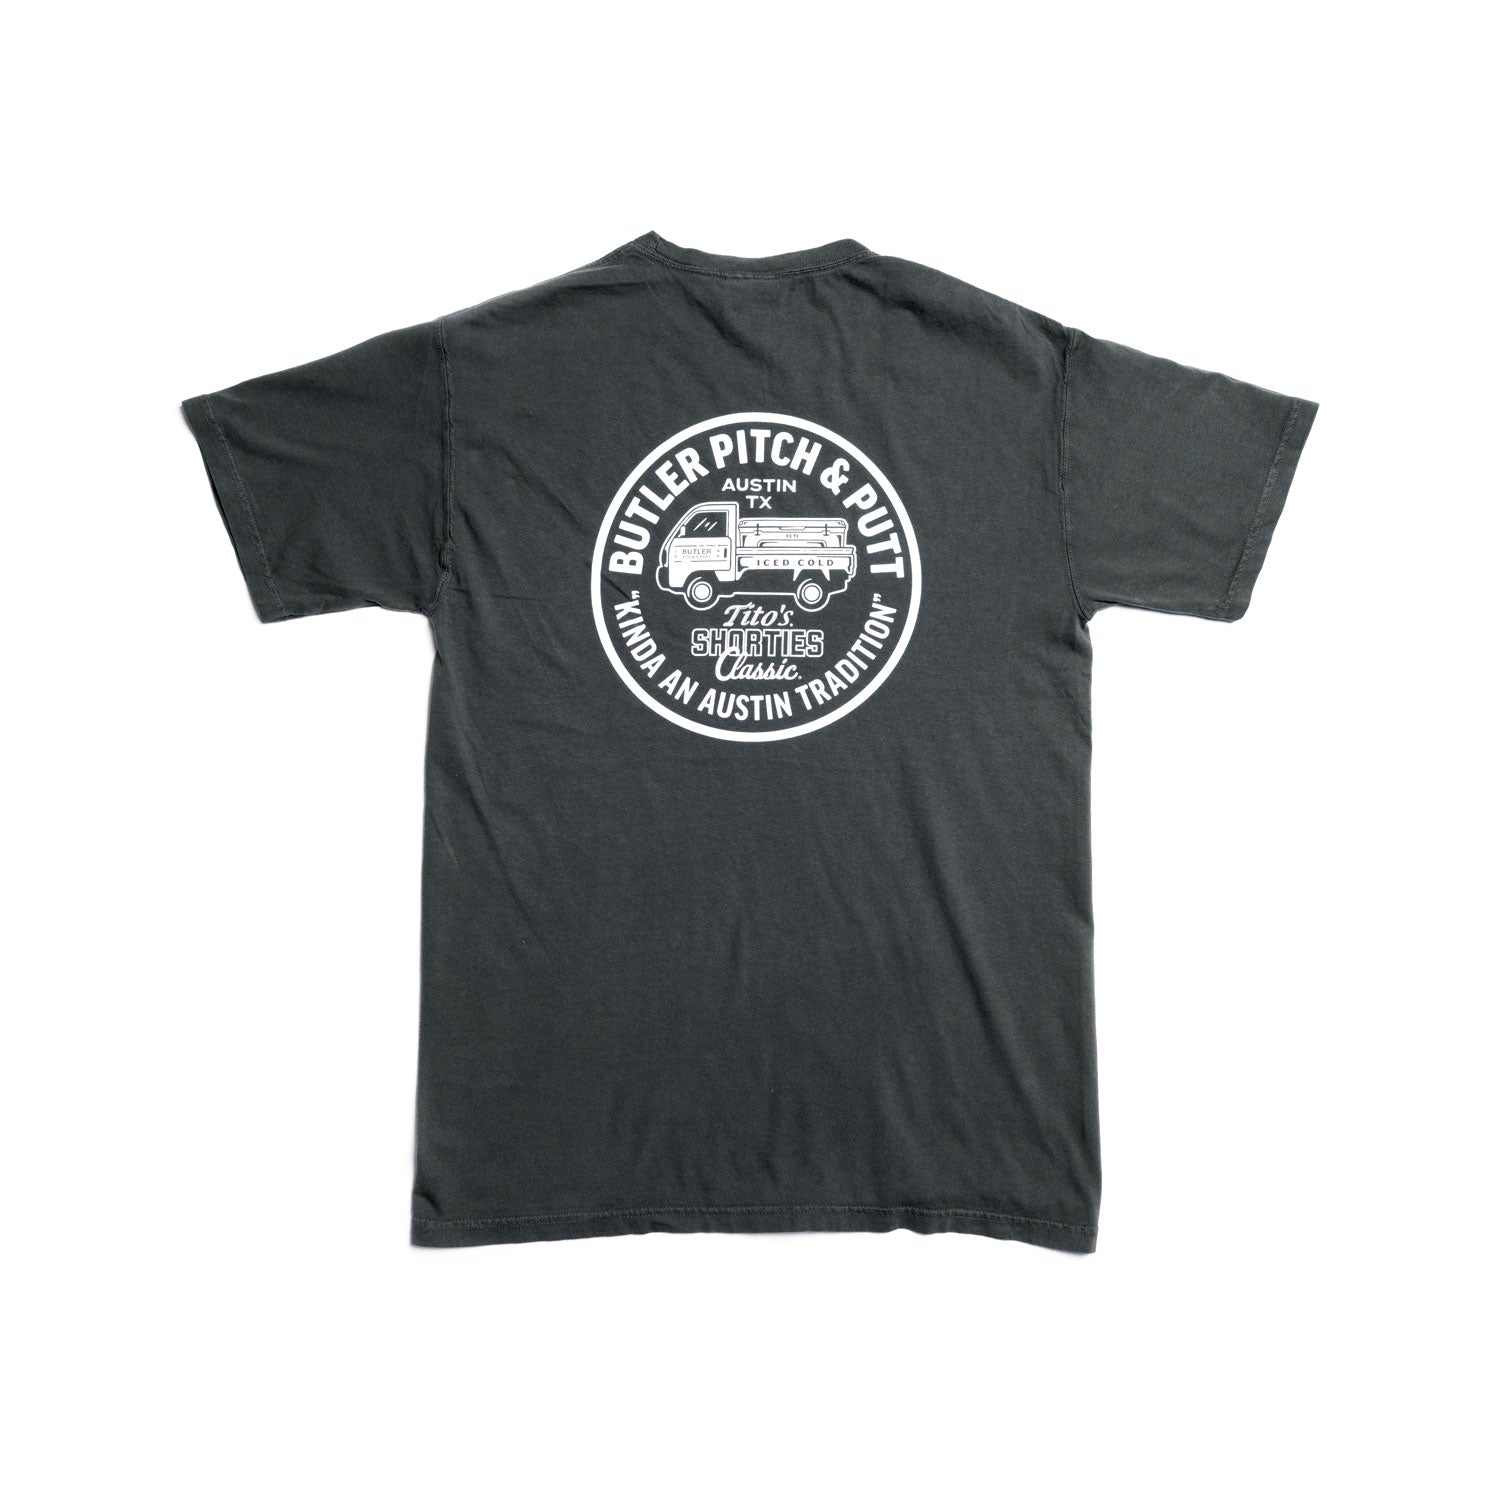 Back of charcoal gray t-shirt with Butler Pitch & Putt design